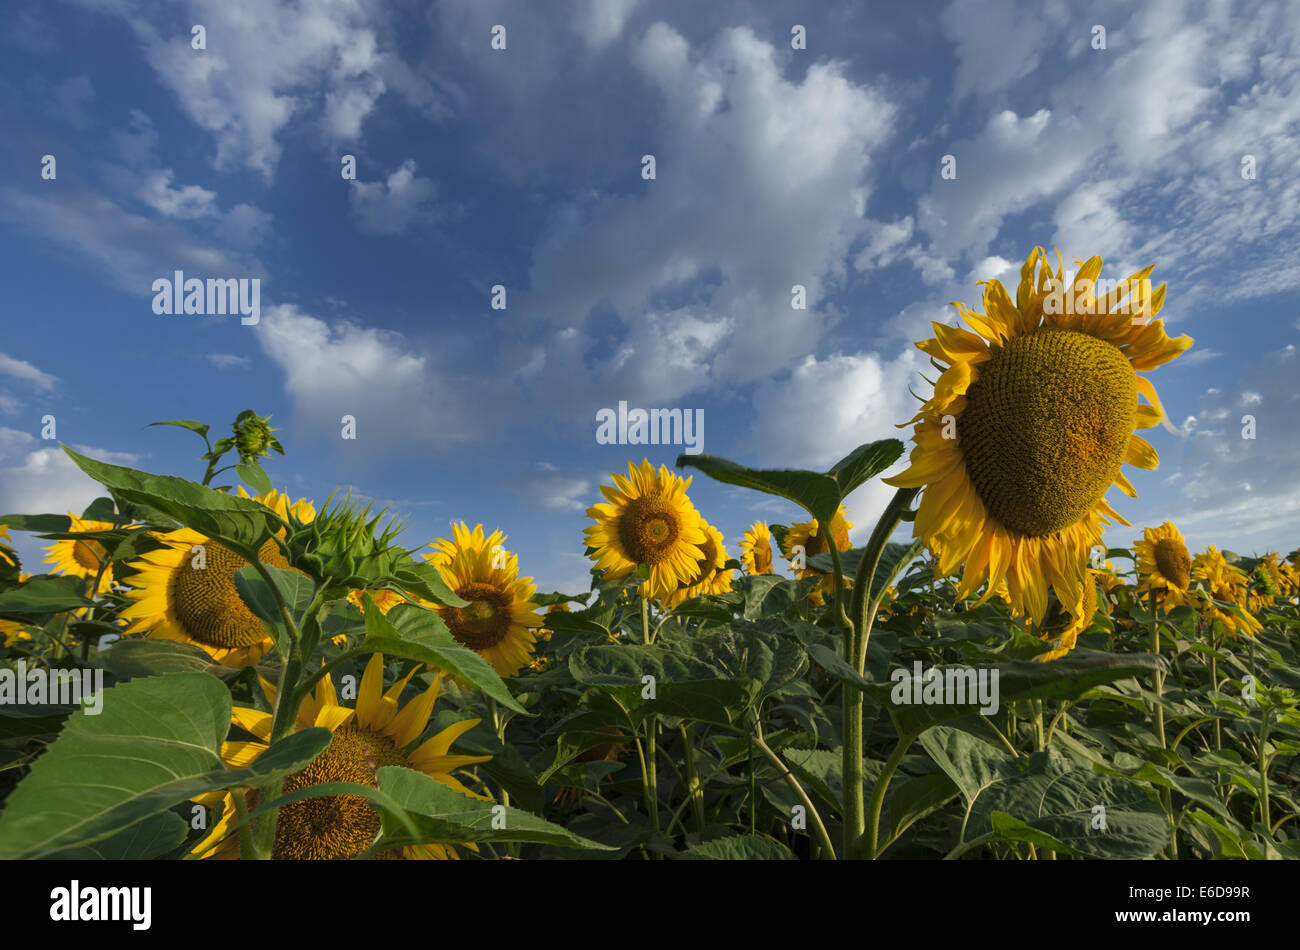 Summer field with yellow sunflowers Stock Photo